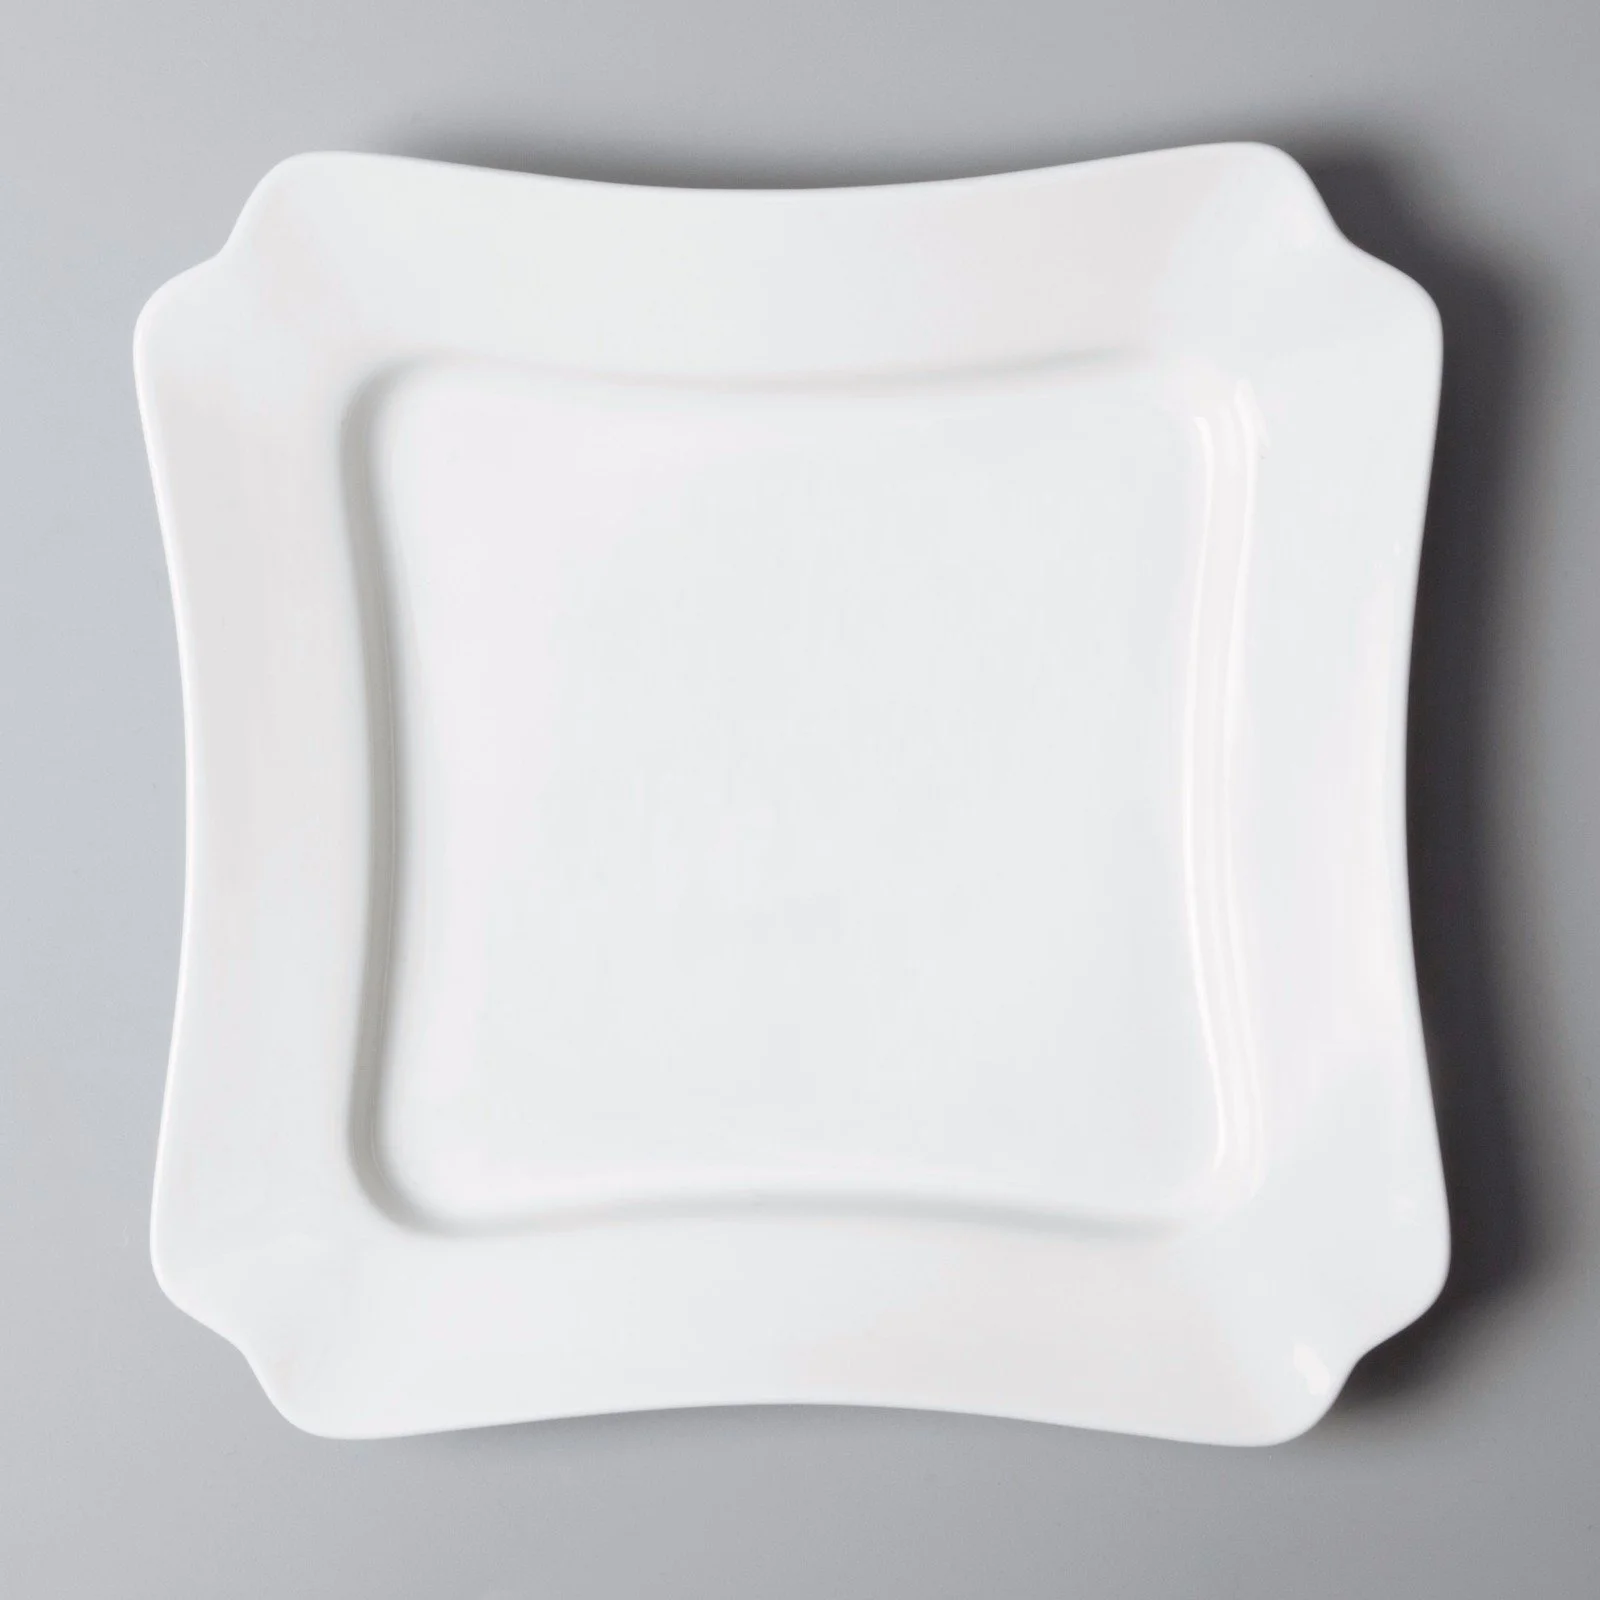 modern commercial restaurant plates french style from China for restaurant